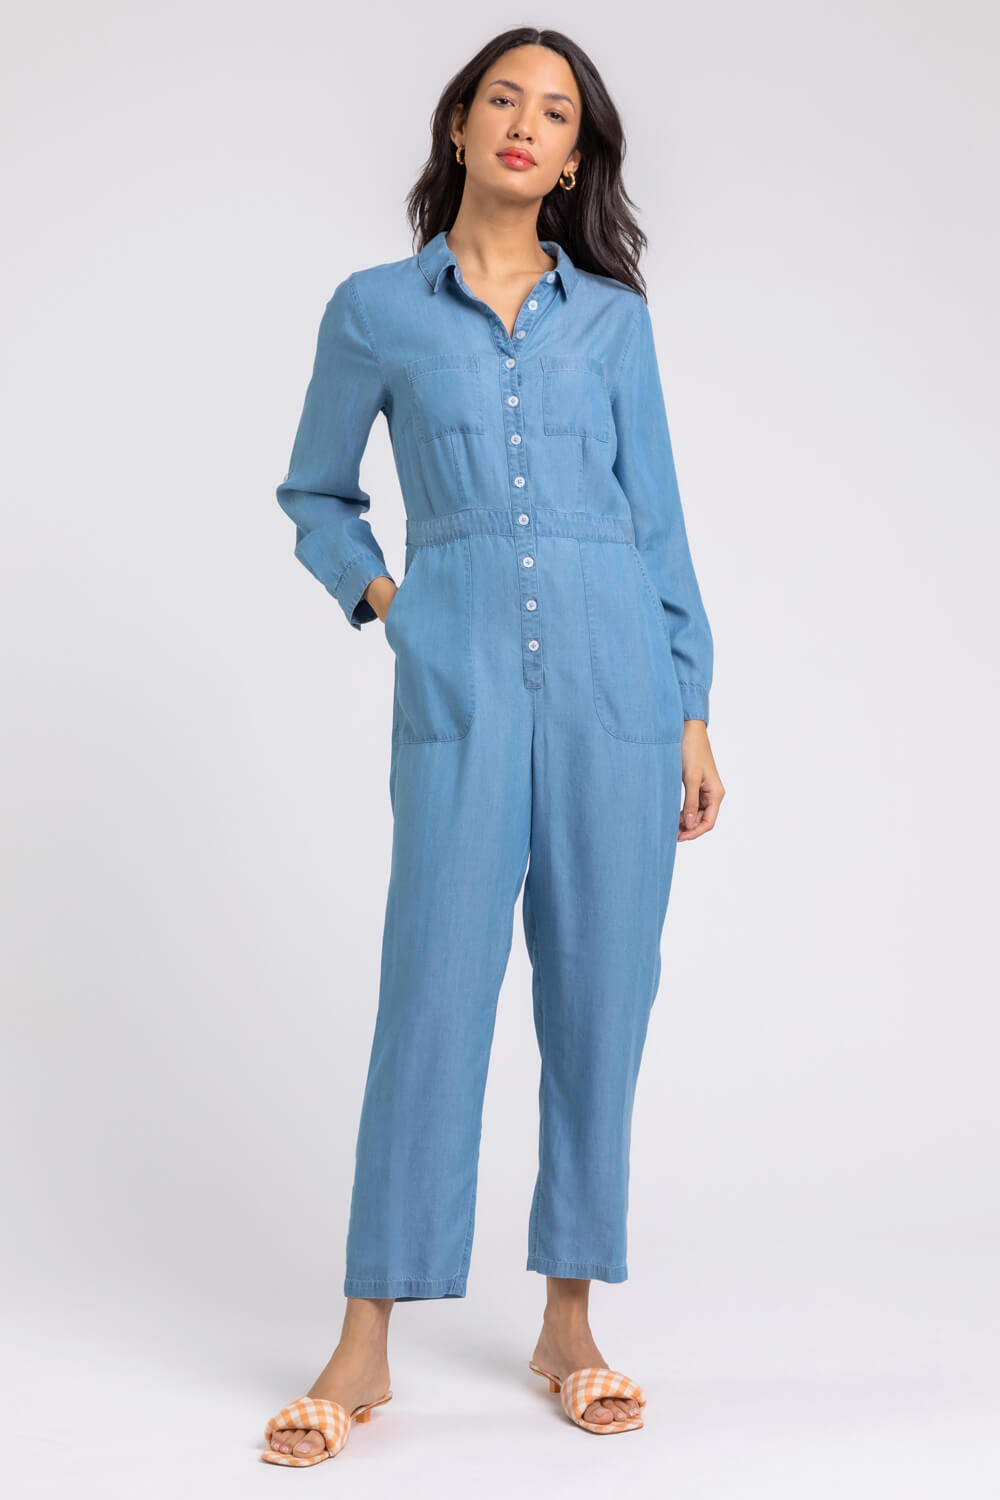 Denim Buttoned Collar Utility Jumpsuit, Image 3 of 5